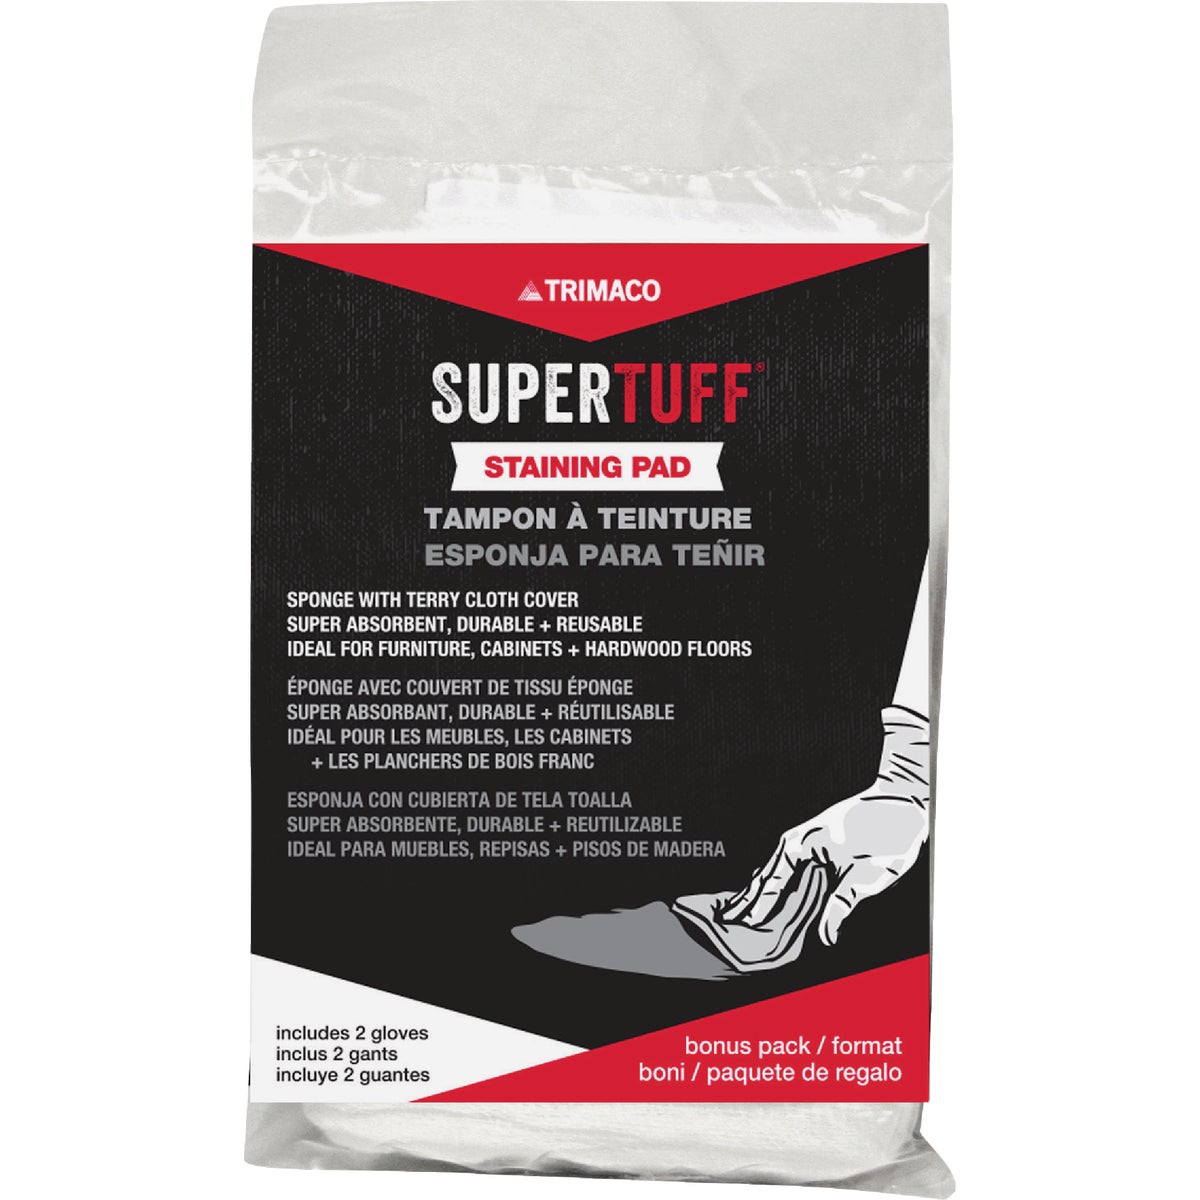 Item 774243, Trimaco's SuperTuff Staining Pad is great for applying stain to any surface